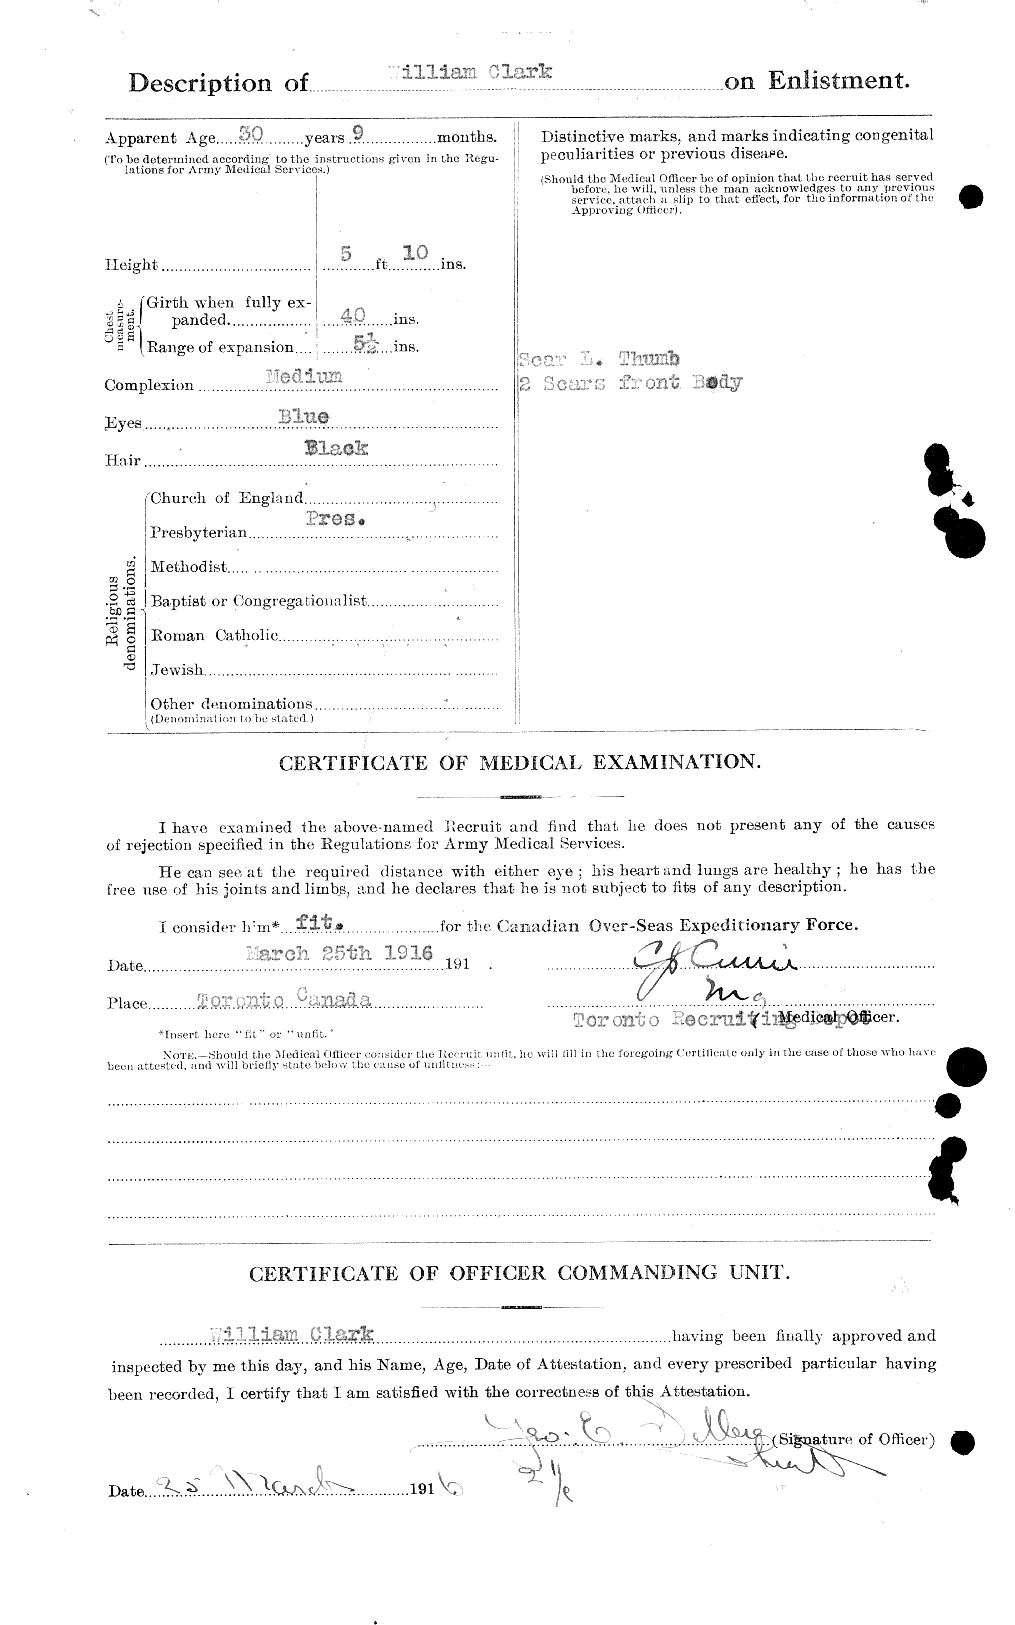 Personnel Records of the First World War - CEF 023552b